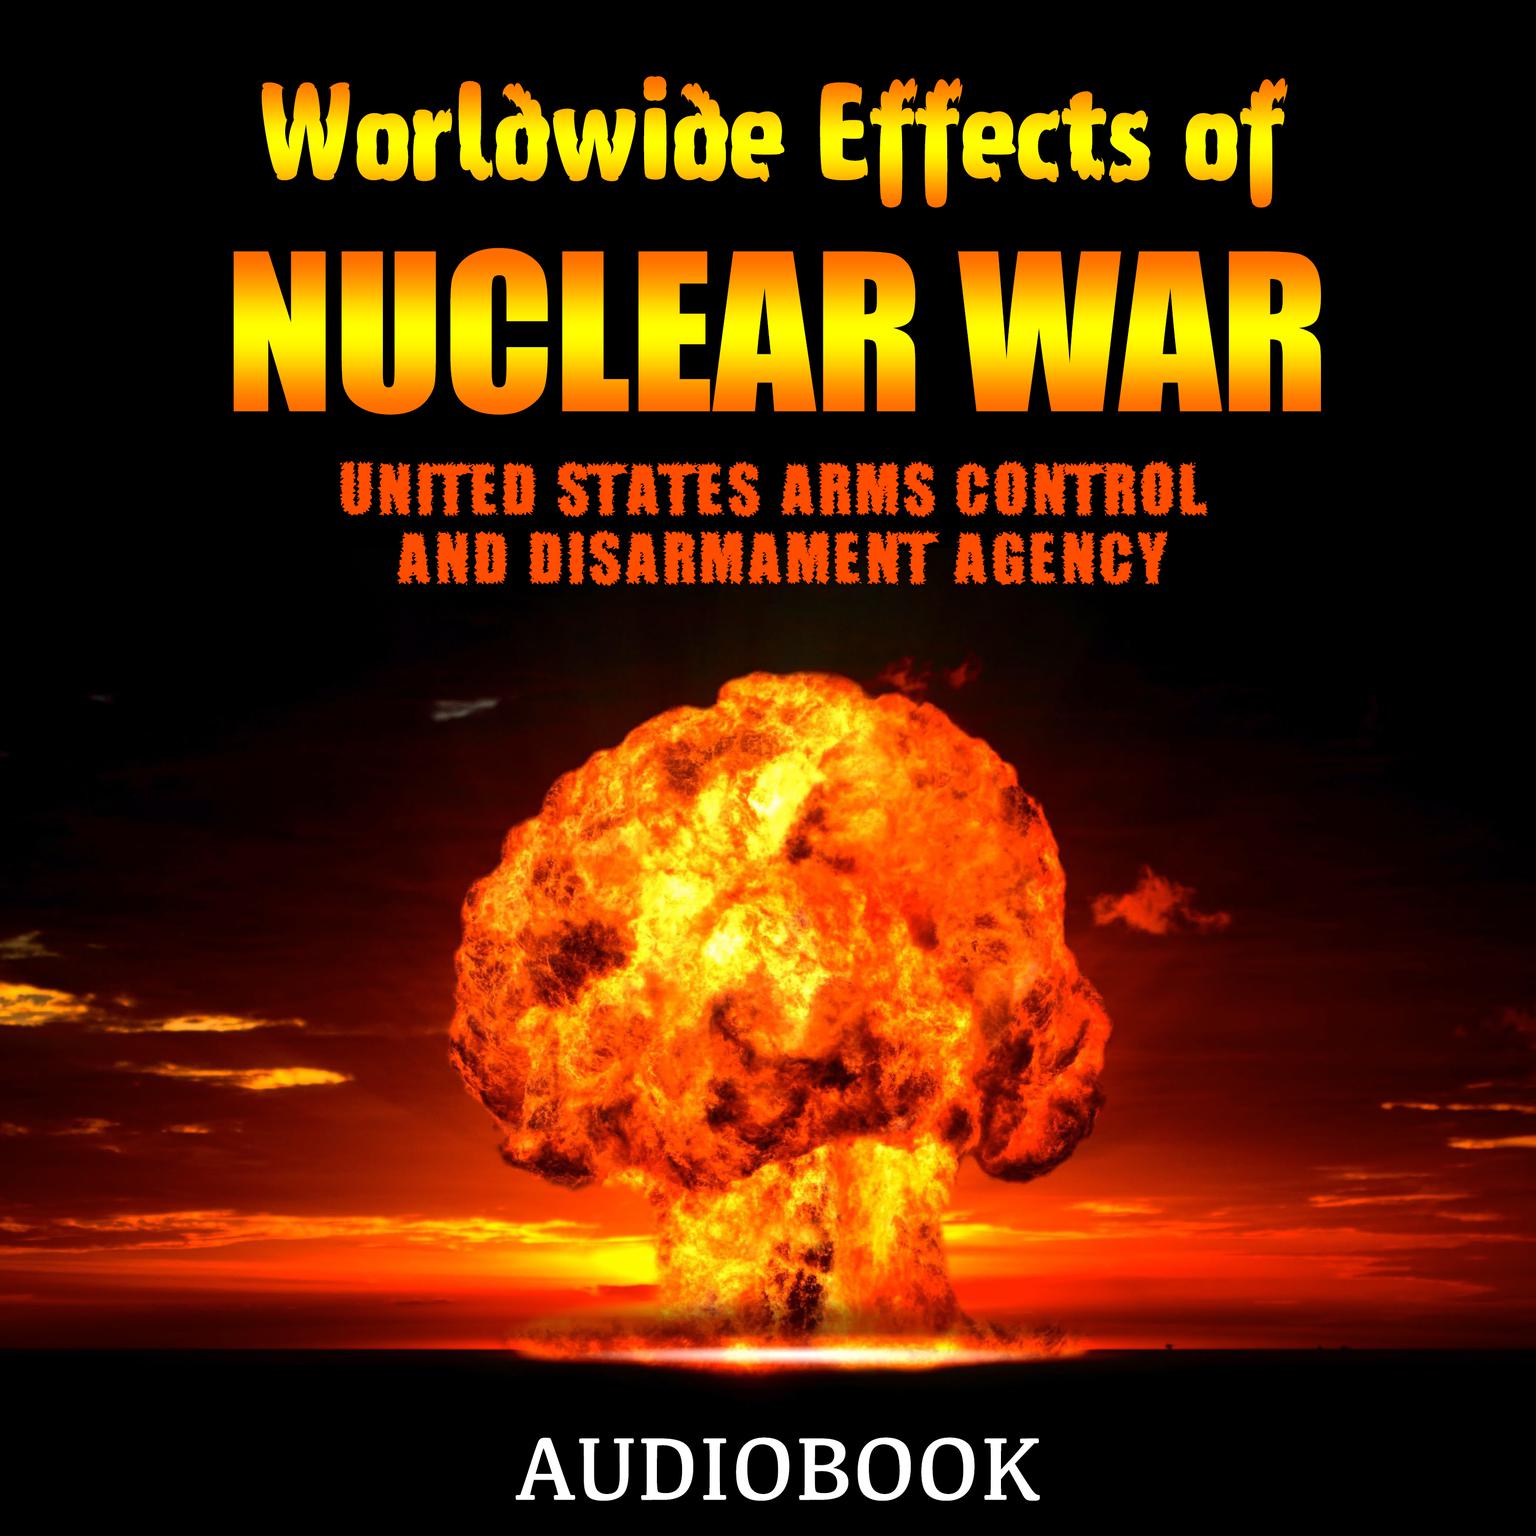 Worldwide Effects of Nuclear War: Some Perspectives Audiobook, by United States Arms Control and Disarmament Agency